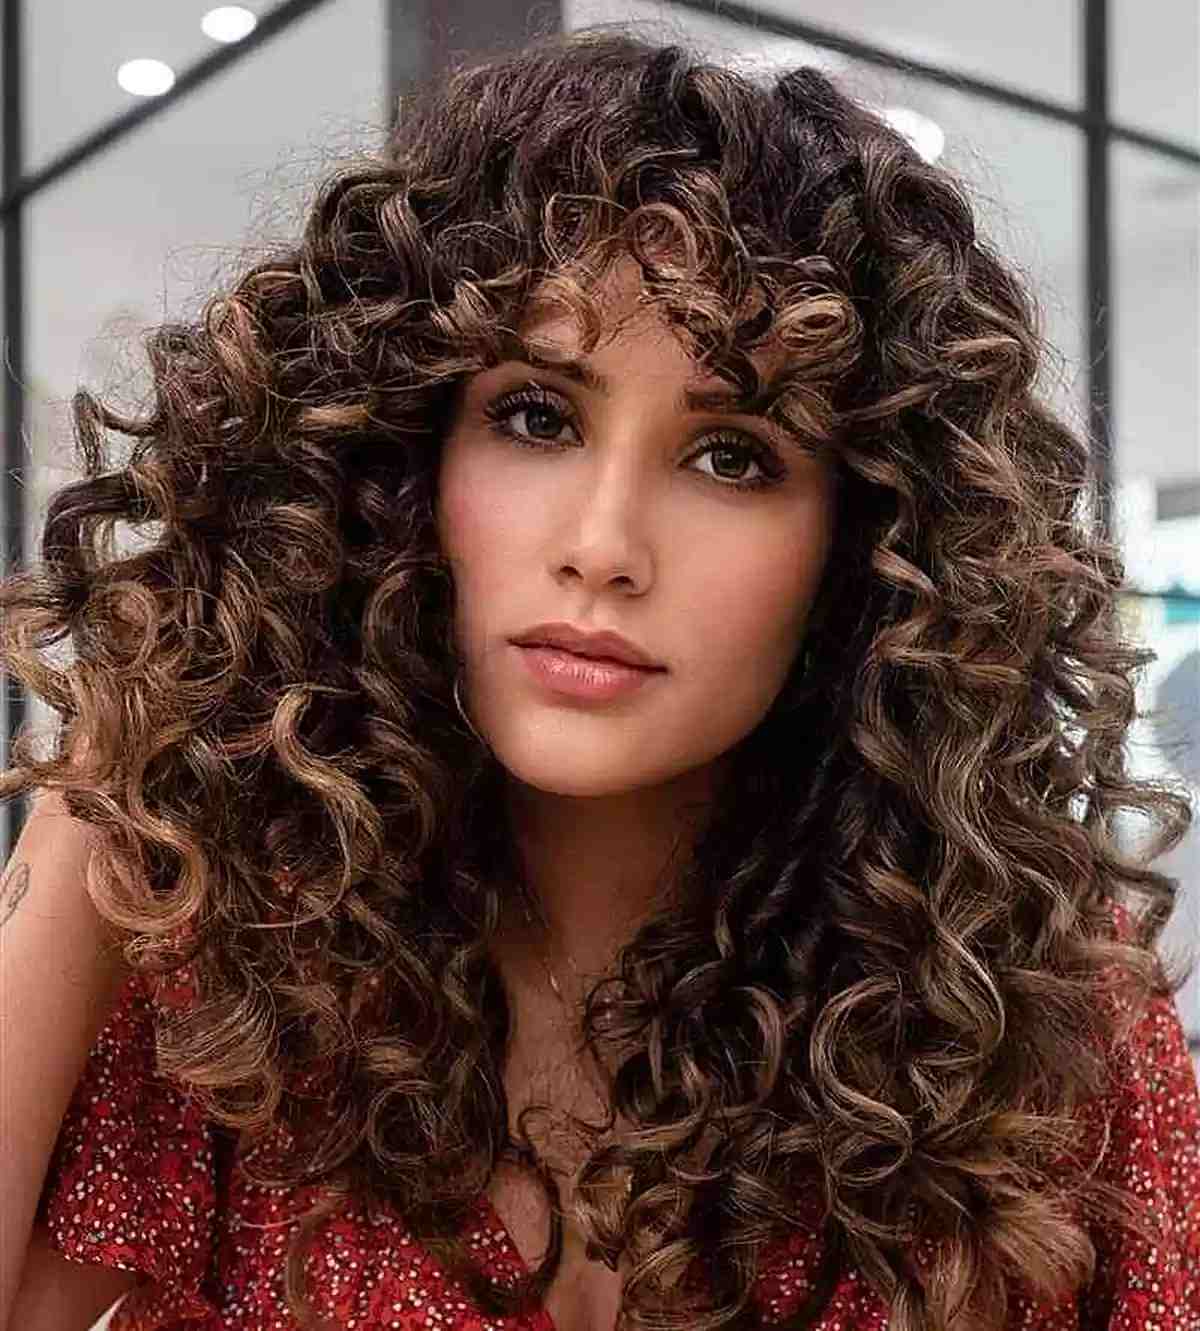 Sun-Kissed Layered Hair with Curly Bangs for Women with Thick Locks and Medium Cut 